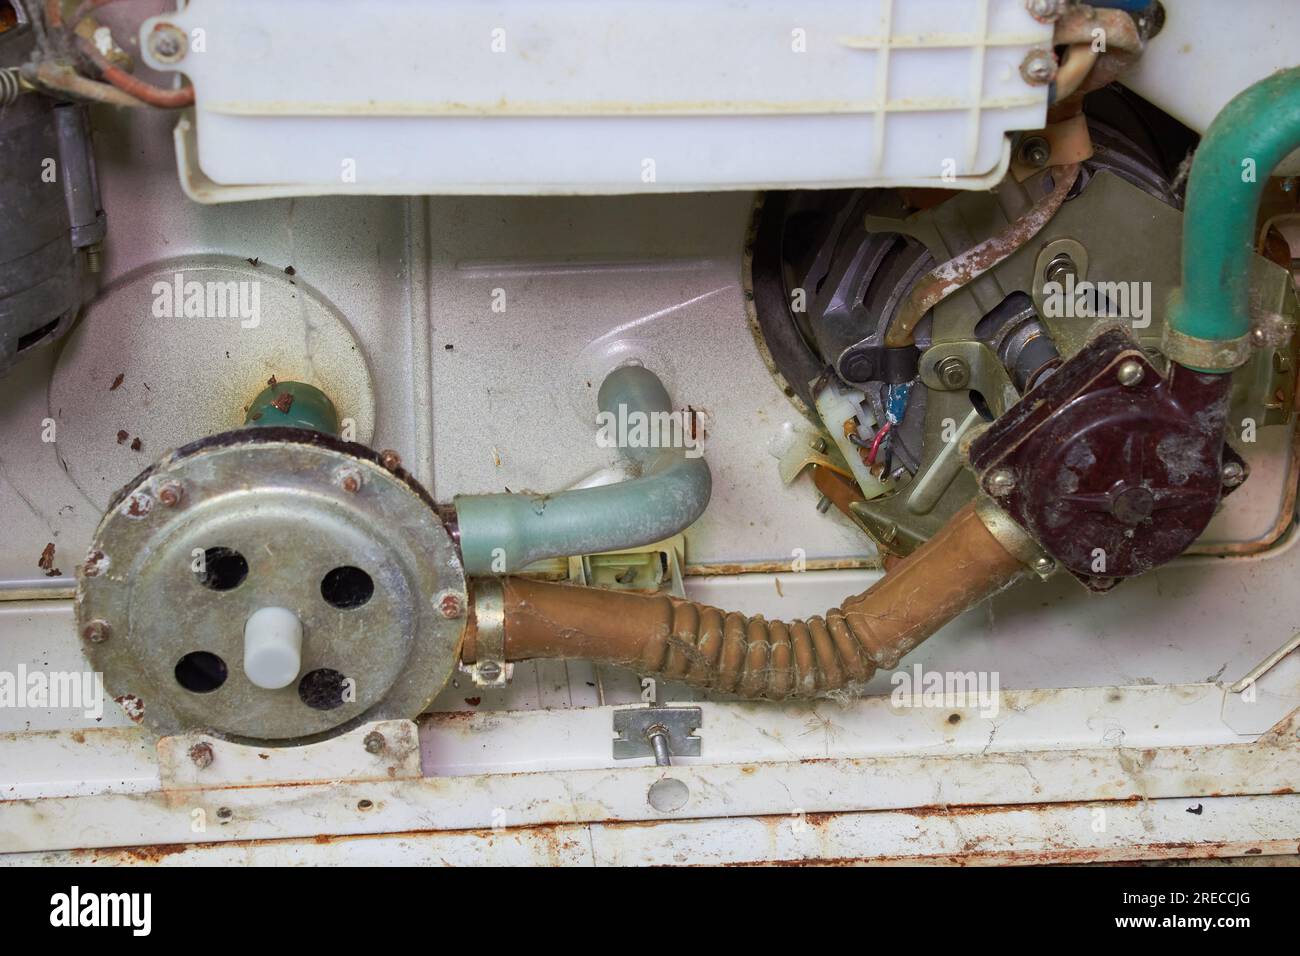 the old washing machine is broken, connecting the hoses to the motor circulating water Stock Photo